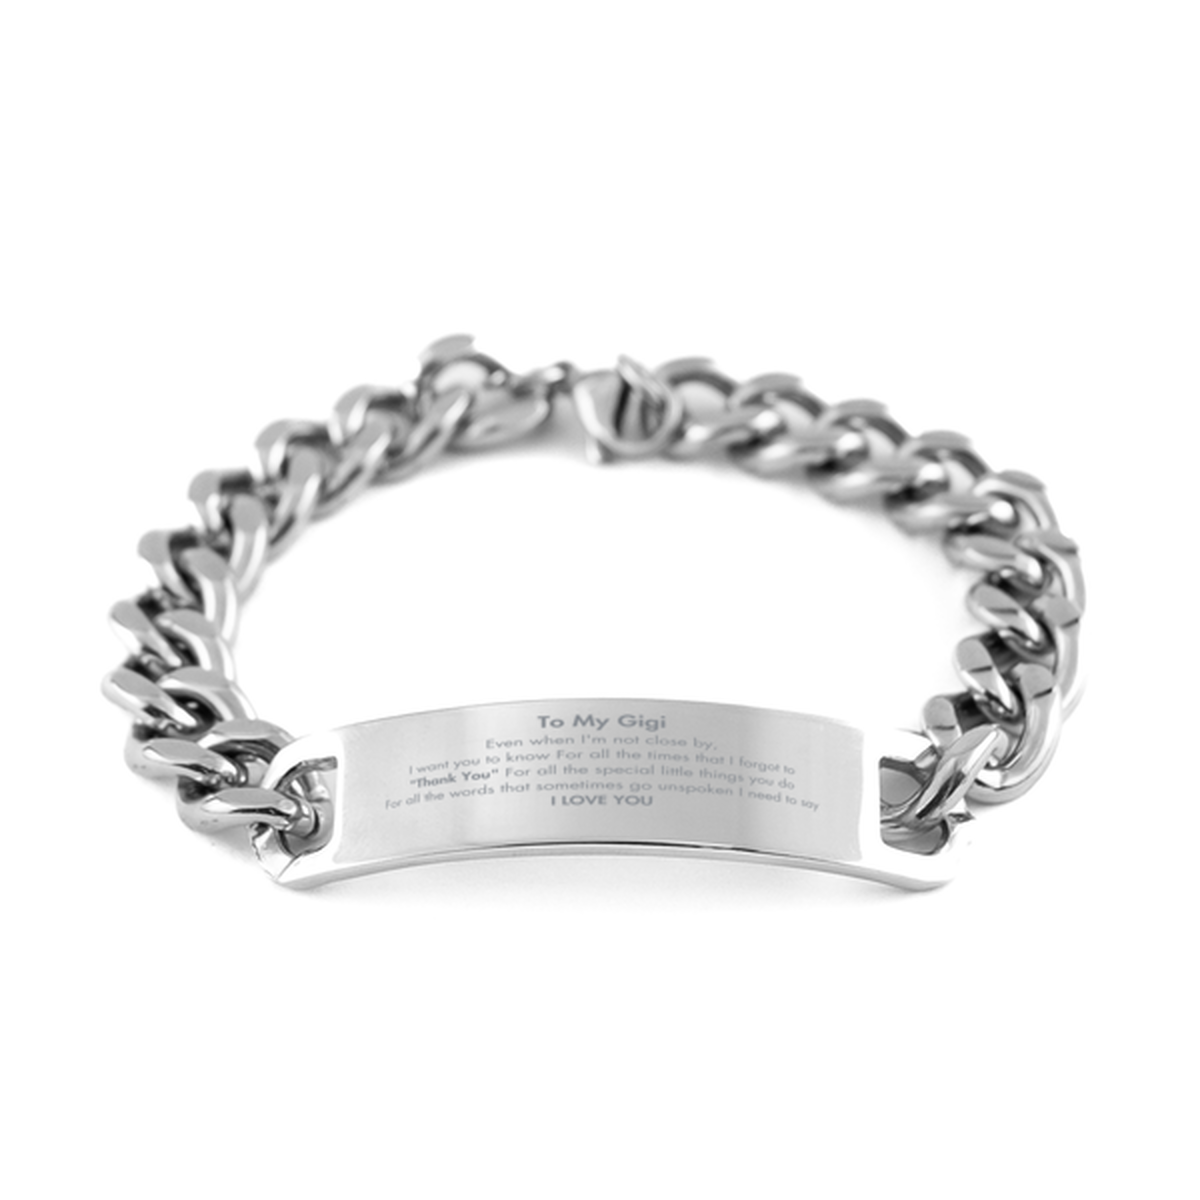 Thank You Gifts for Gigi, Keepsake Cuban Chain Stainless Steel Bracelet Gifts for Gigi Birthday Mother's day Father's Day Gigi For all the words That sometimes go unspoken I need to say I LOVE YOU